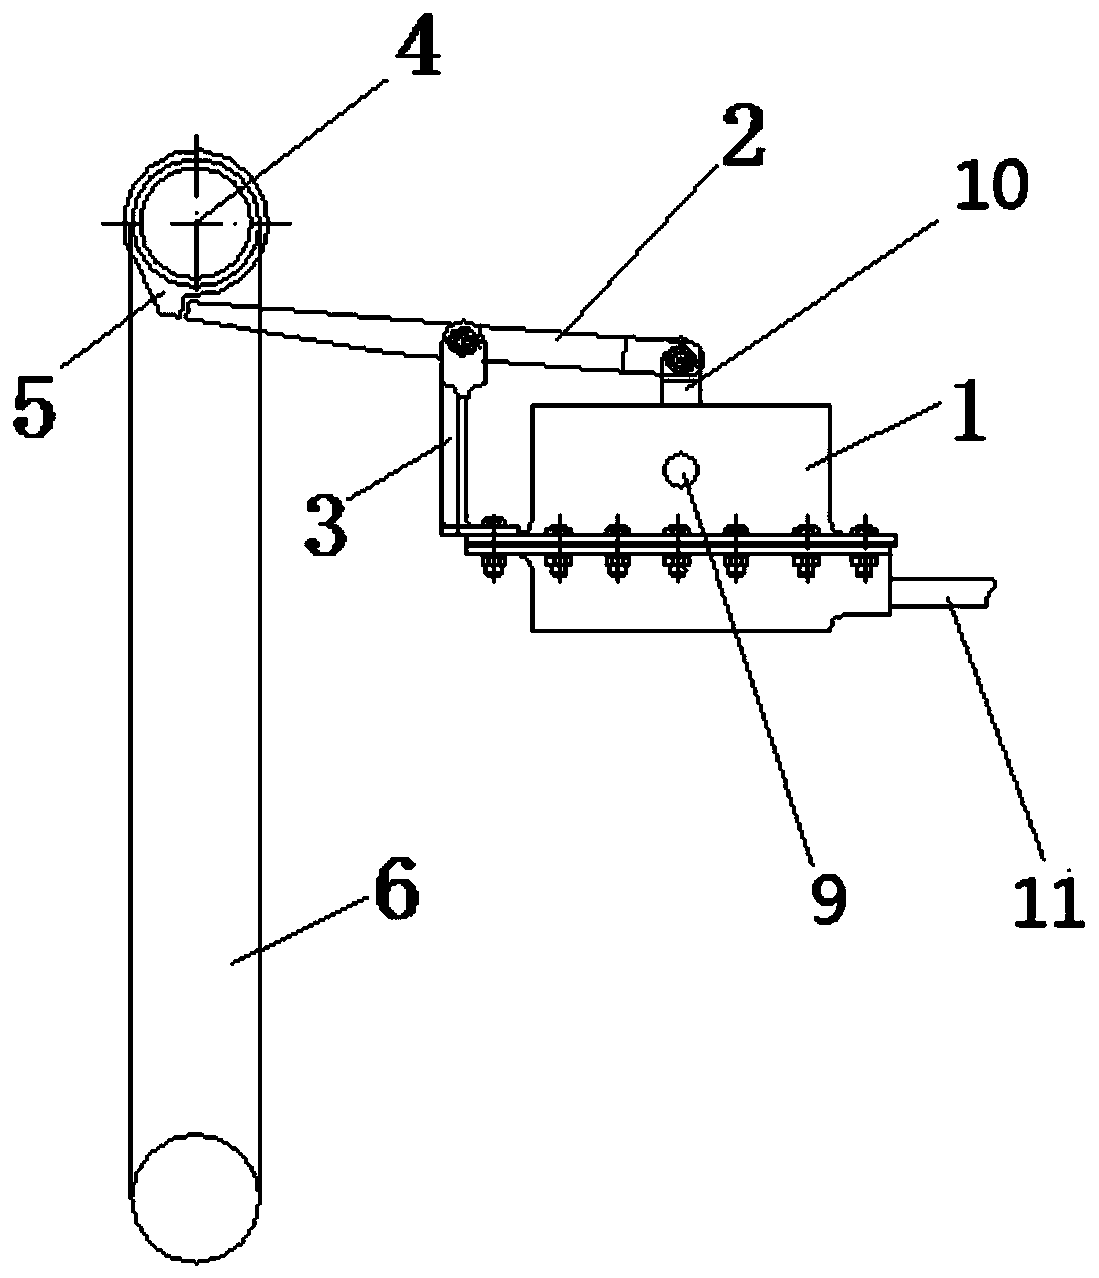 Insurance structure and insurance method for airplane cabin door locking state